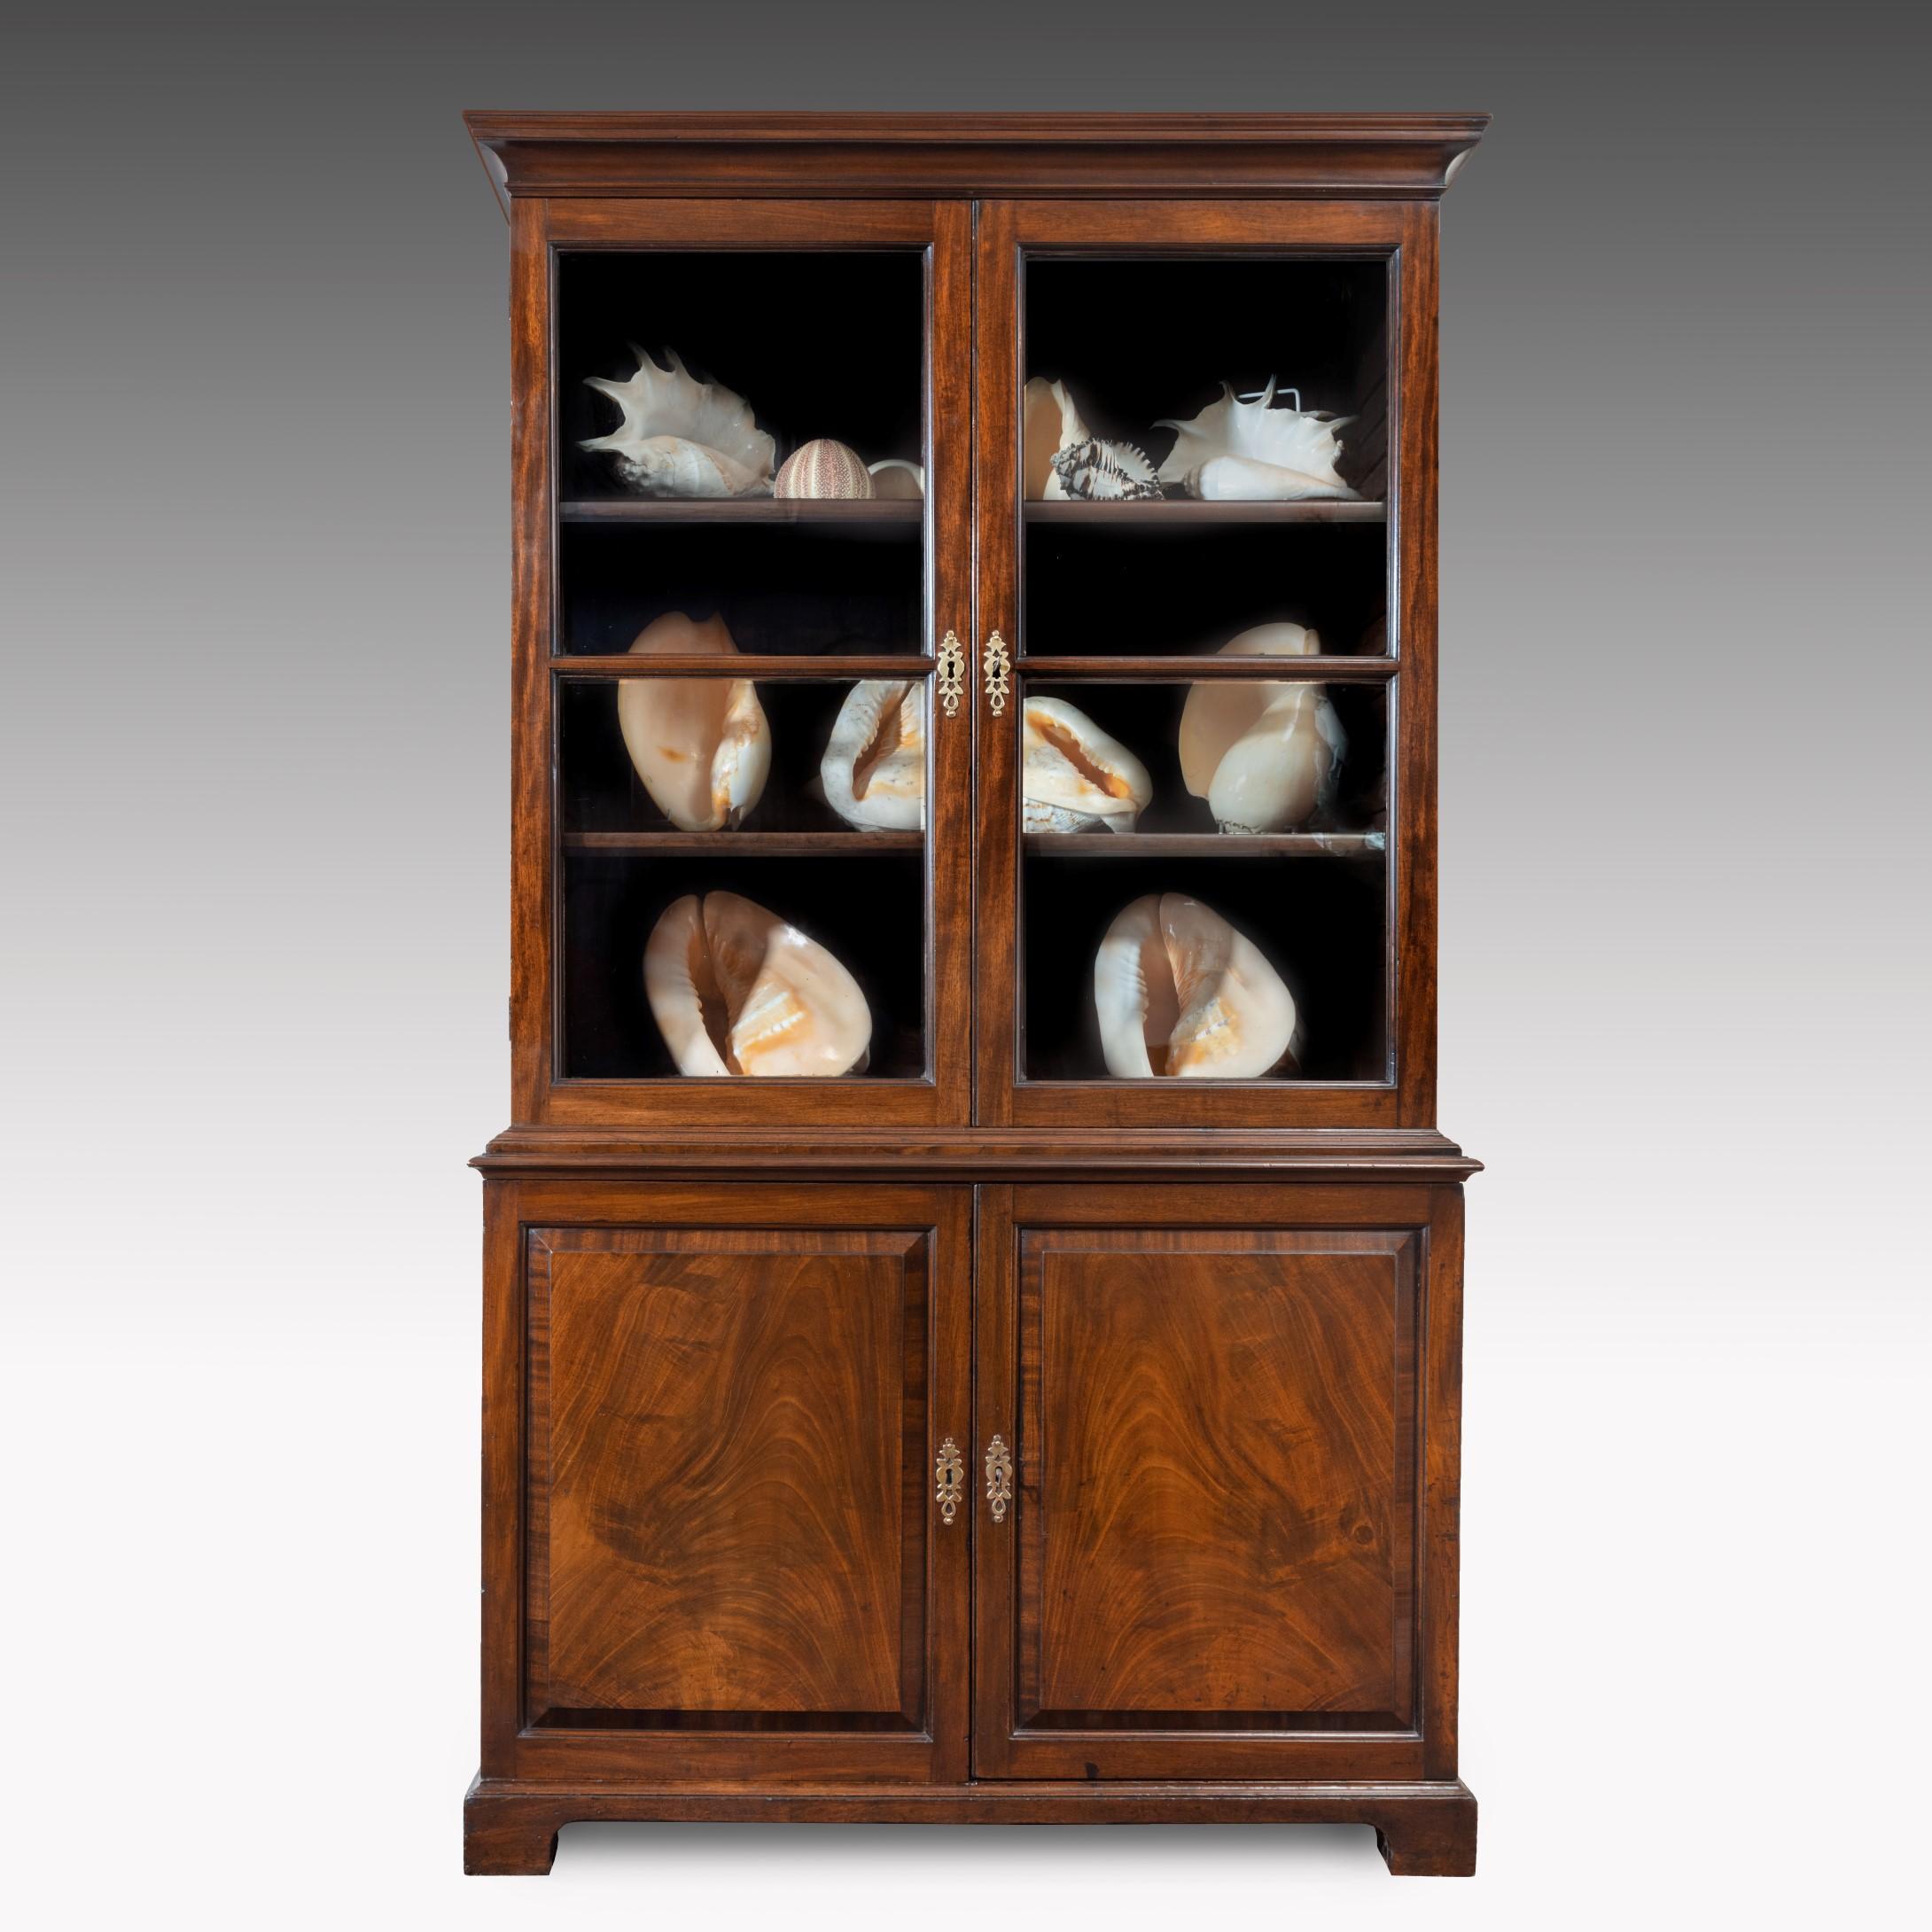 A handsome George II mahogany cupboard base bookcase; the cavetto moulded cornice above a pair of glazed doors which open to reveal adjustable shelves; below are a pair of fielded panel doors veneered in beautifully figured Cuban mahogany and open